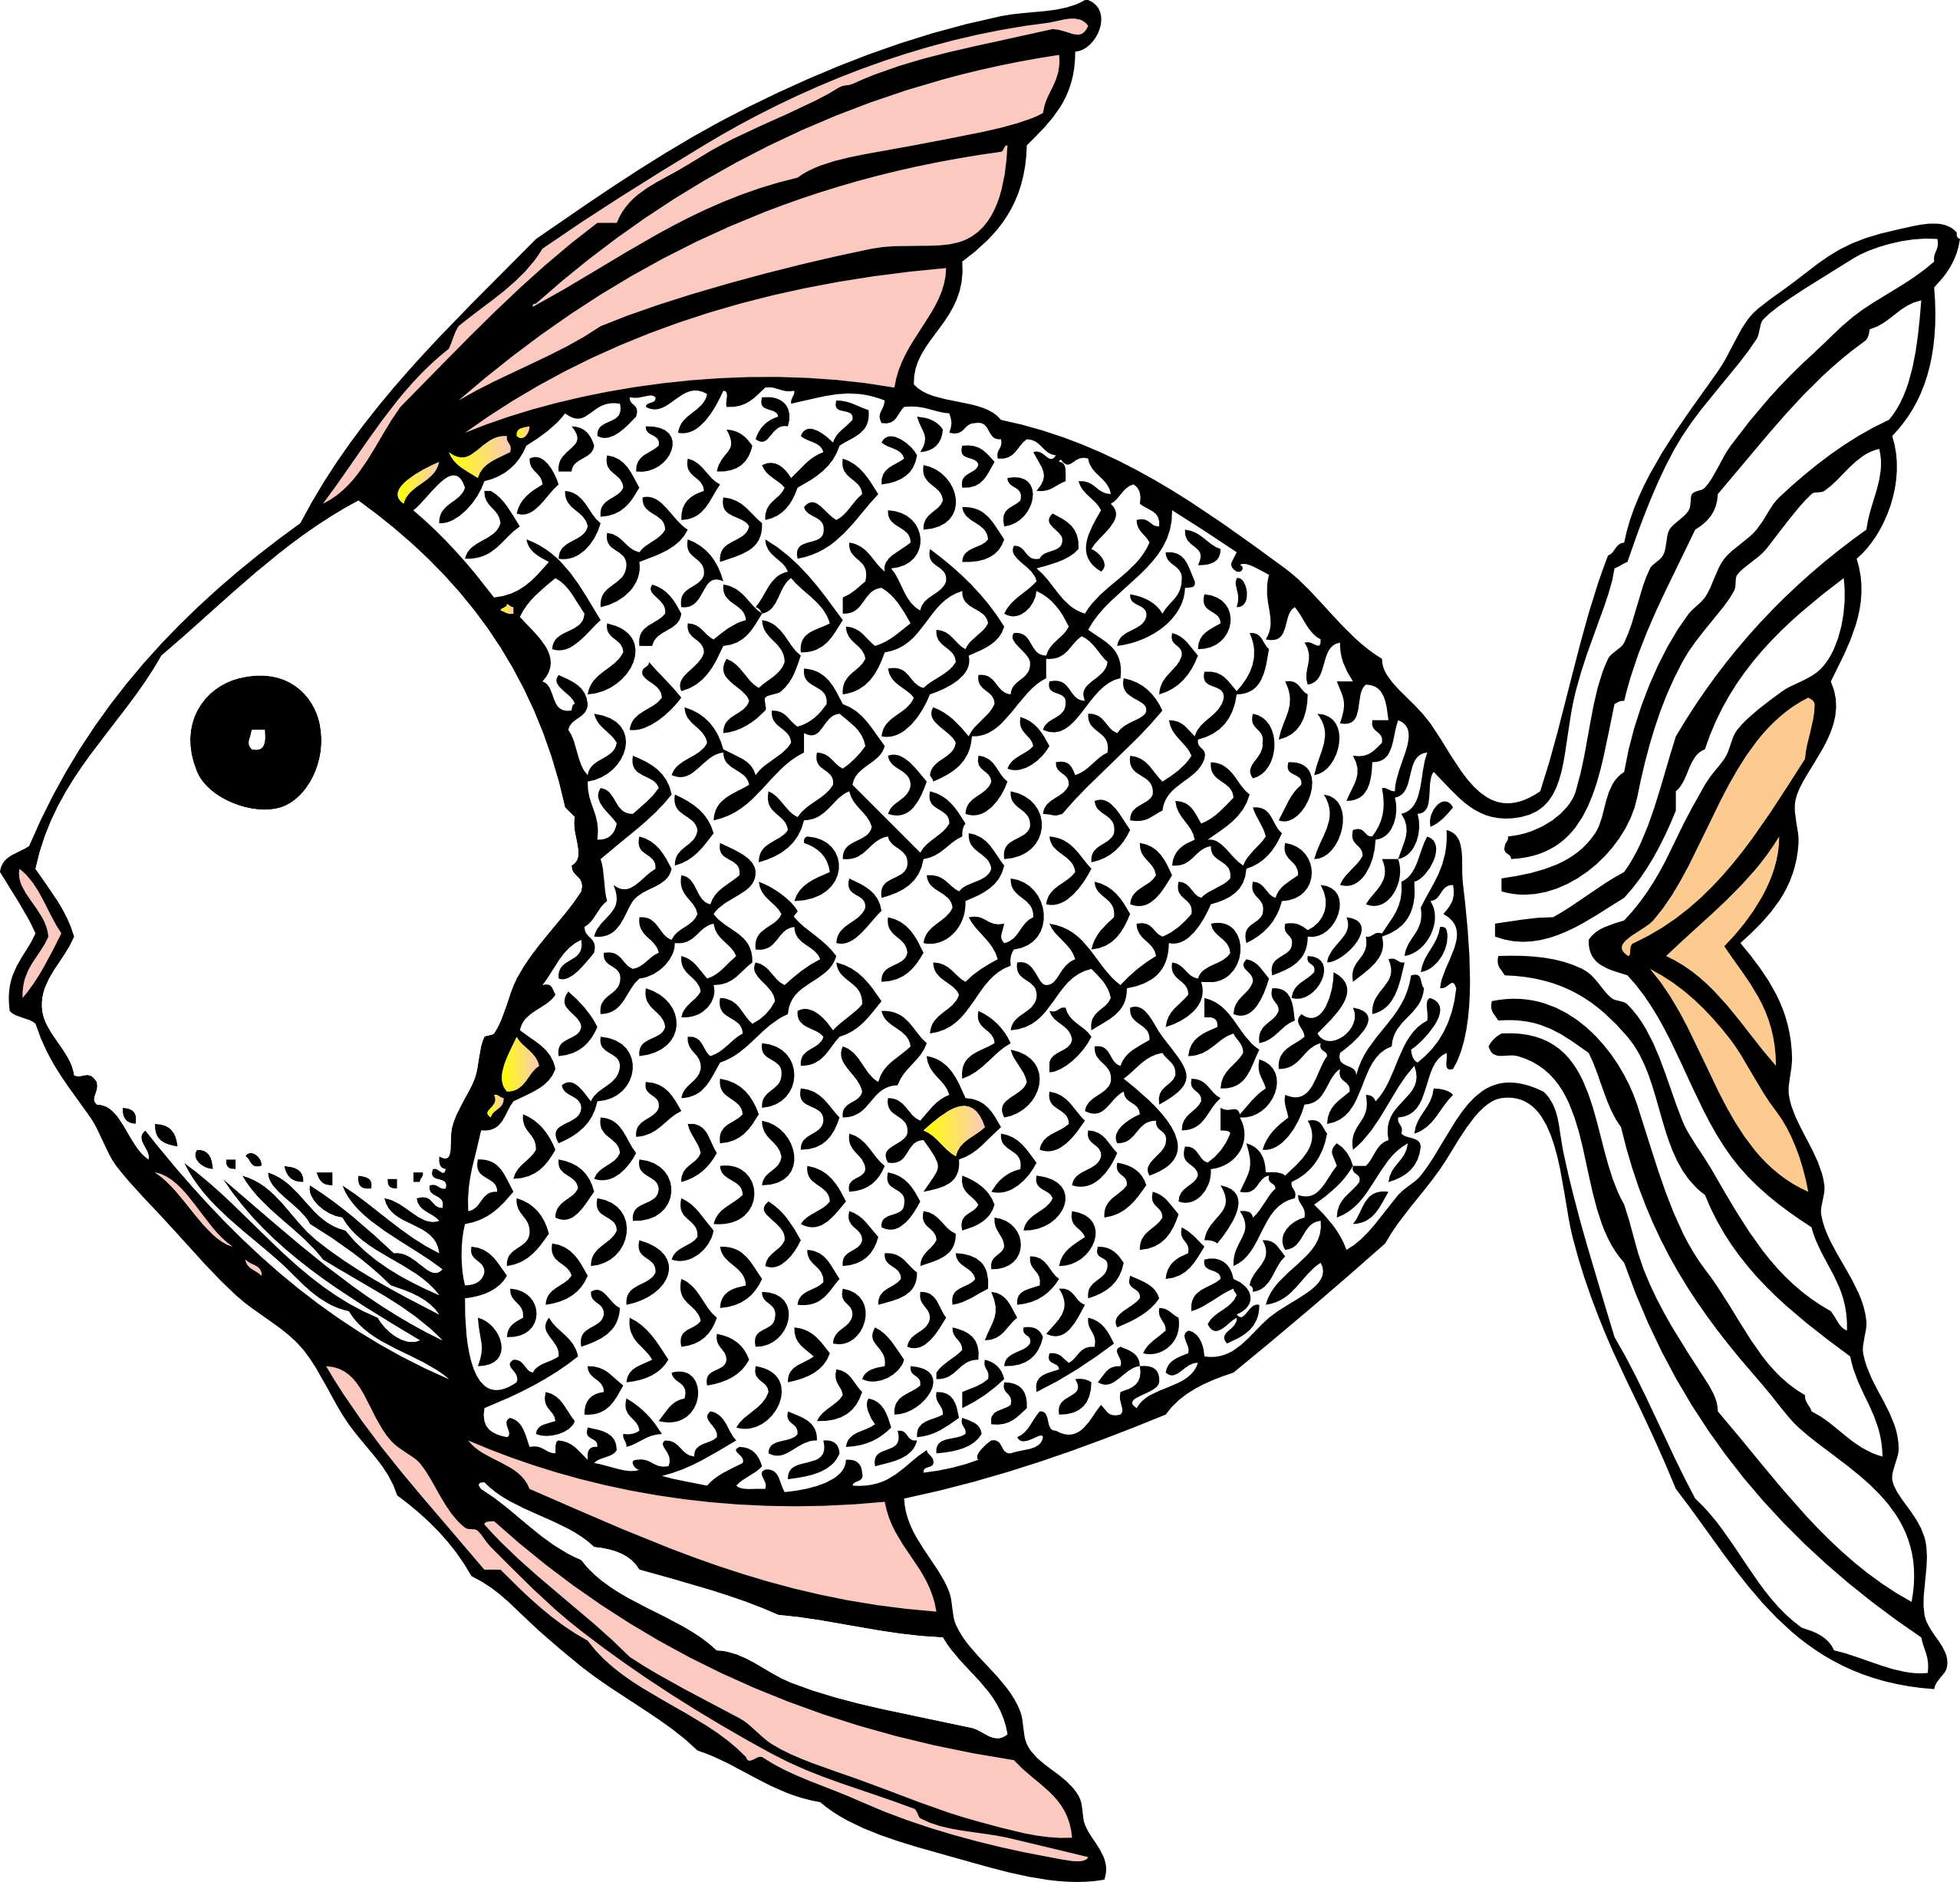 Black and white free. Seafood clipart 4 fish